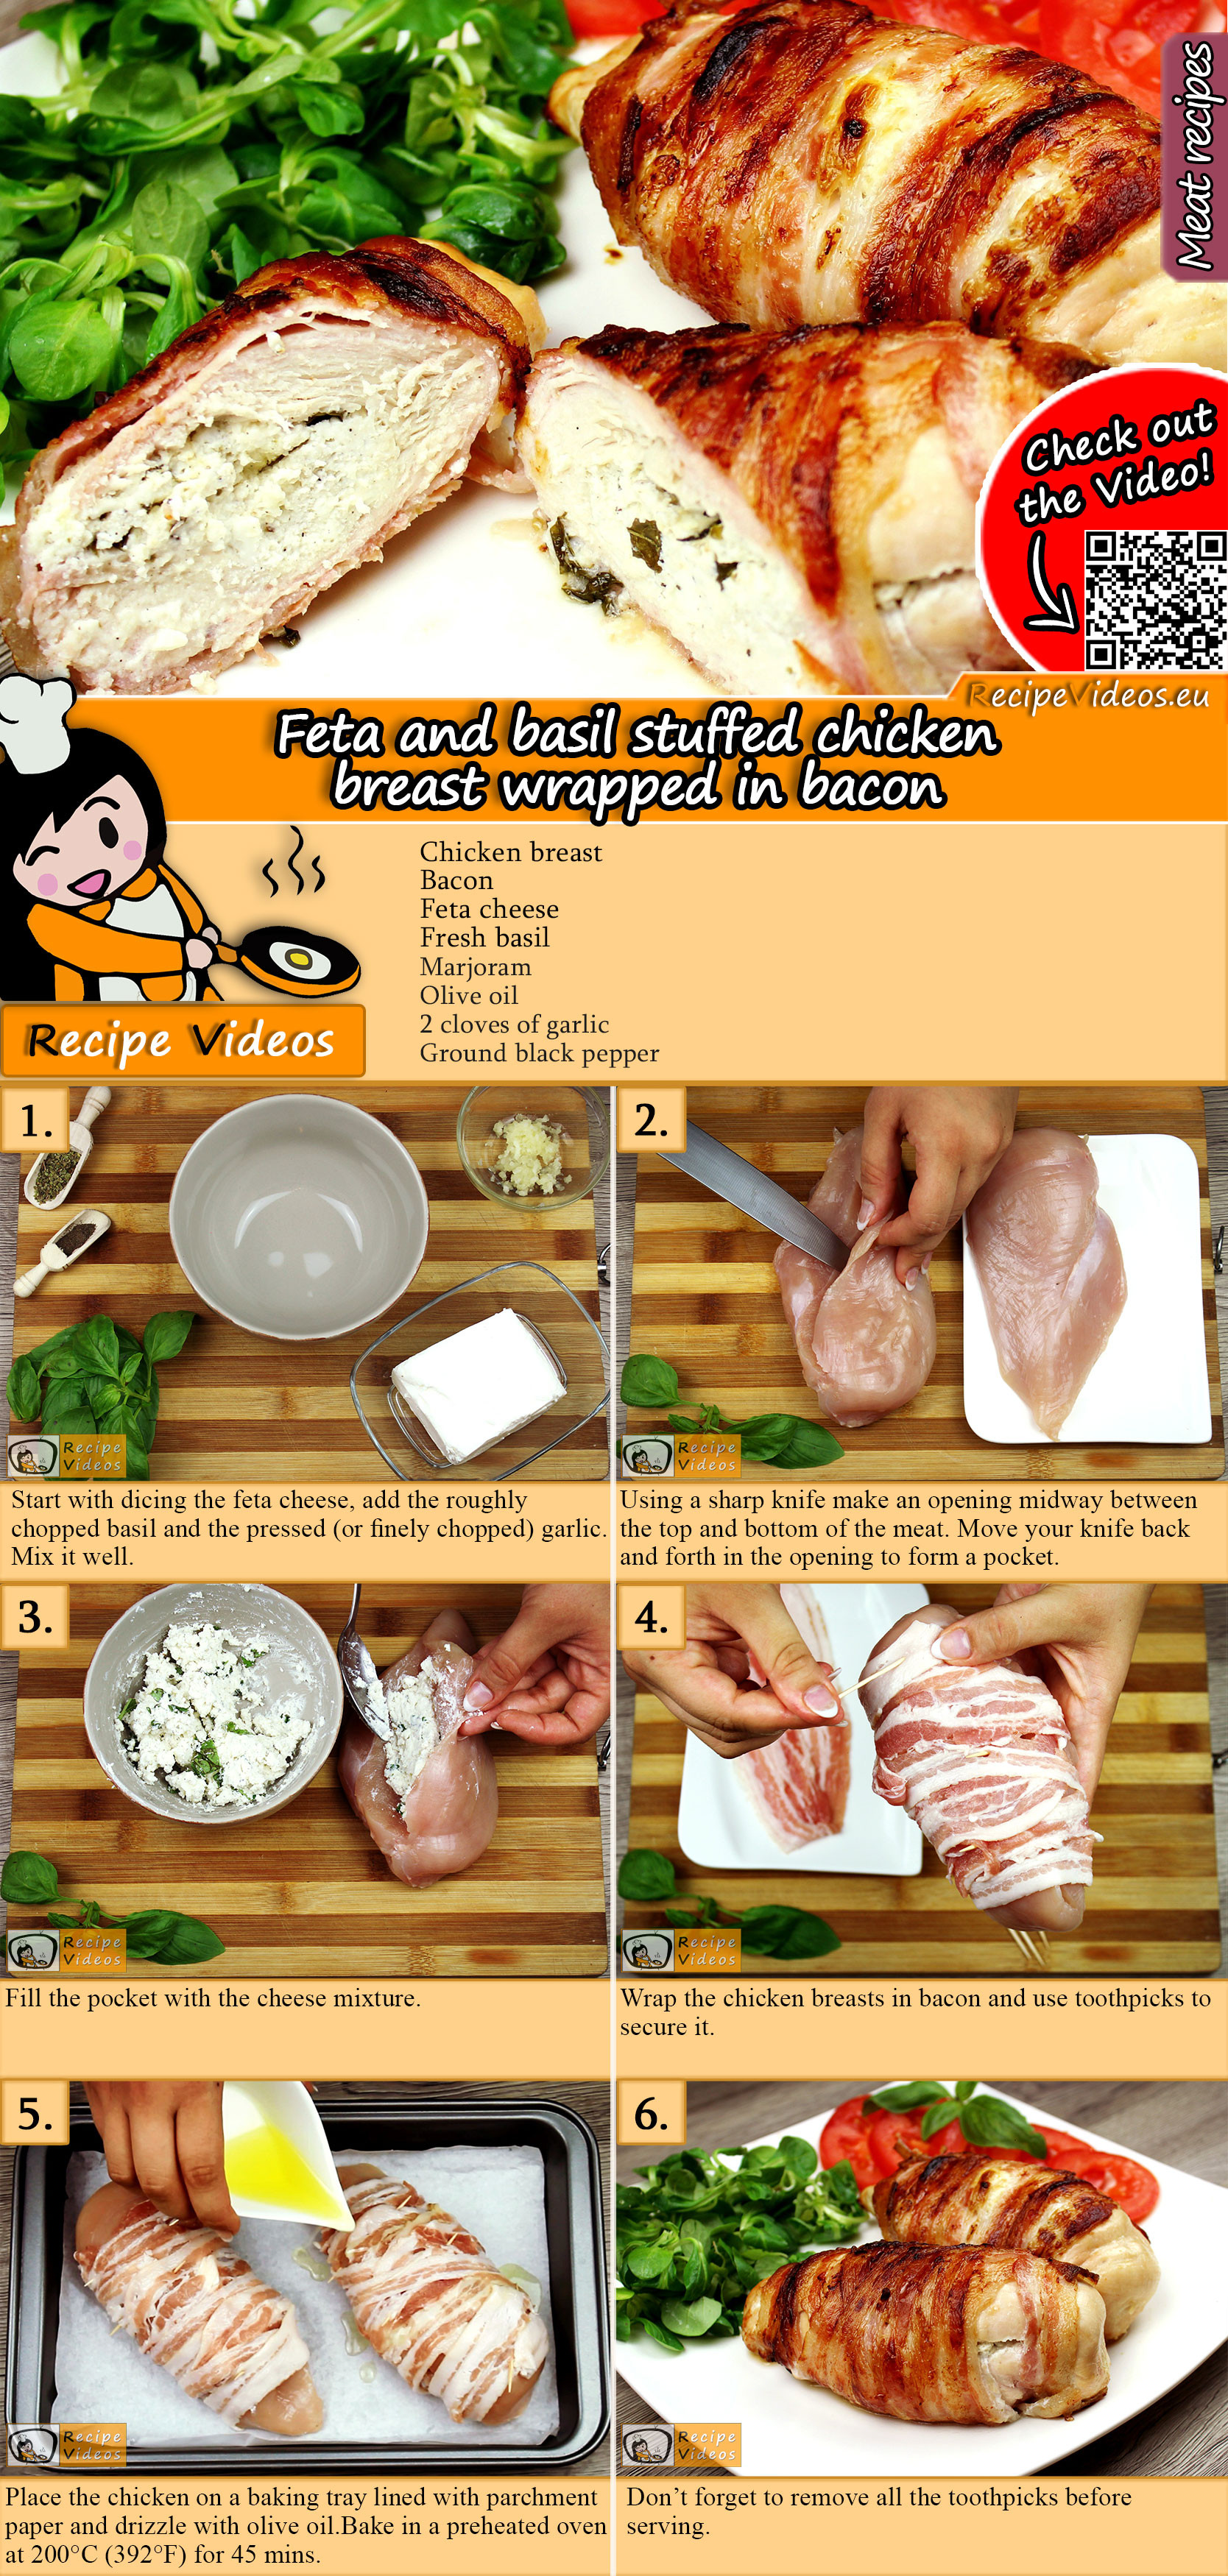 Feta and basil stuffed chicken breast wrapped in bacon recipe with video